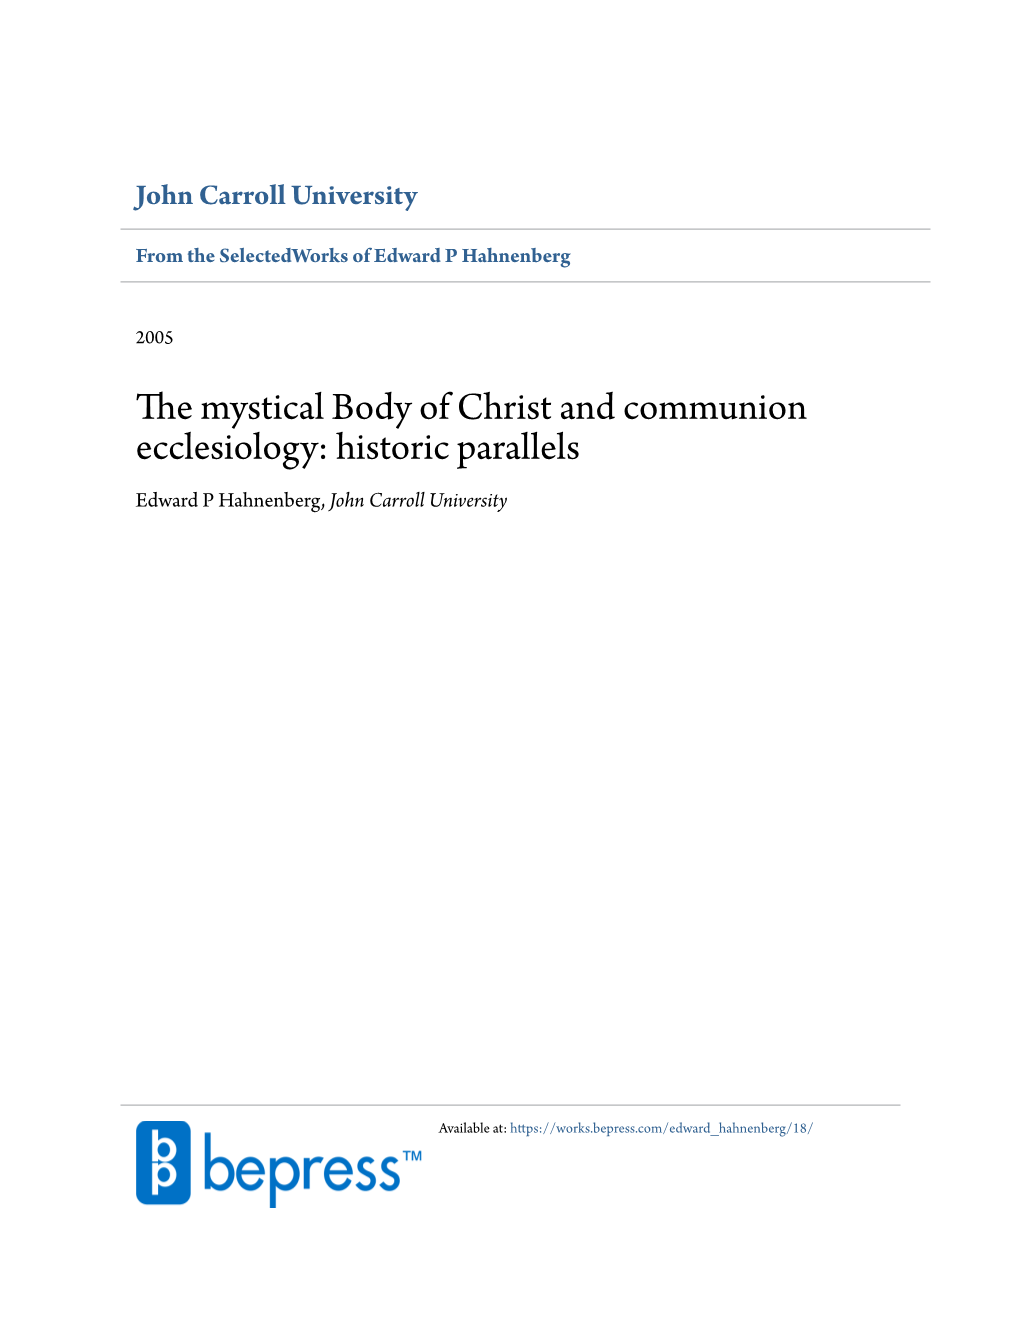 The Mystical Body of Christ and Communion Ecclesiology: Historical Parallels